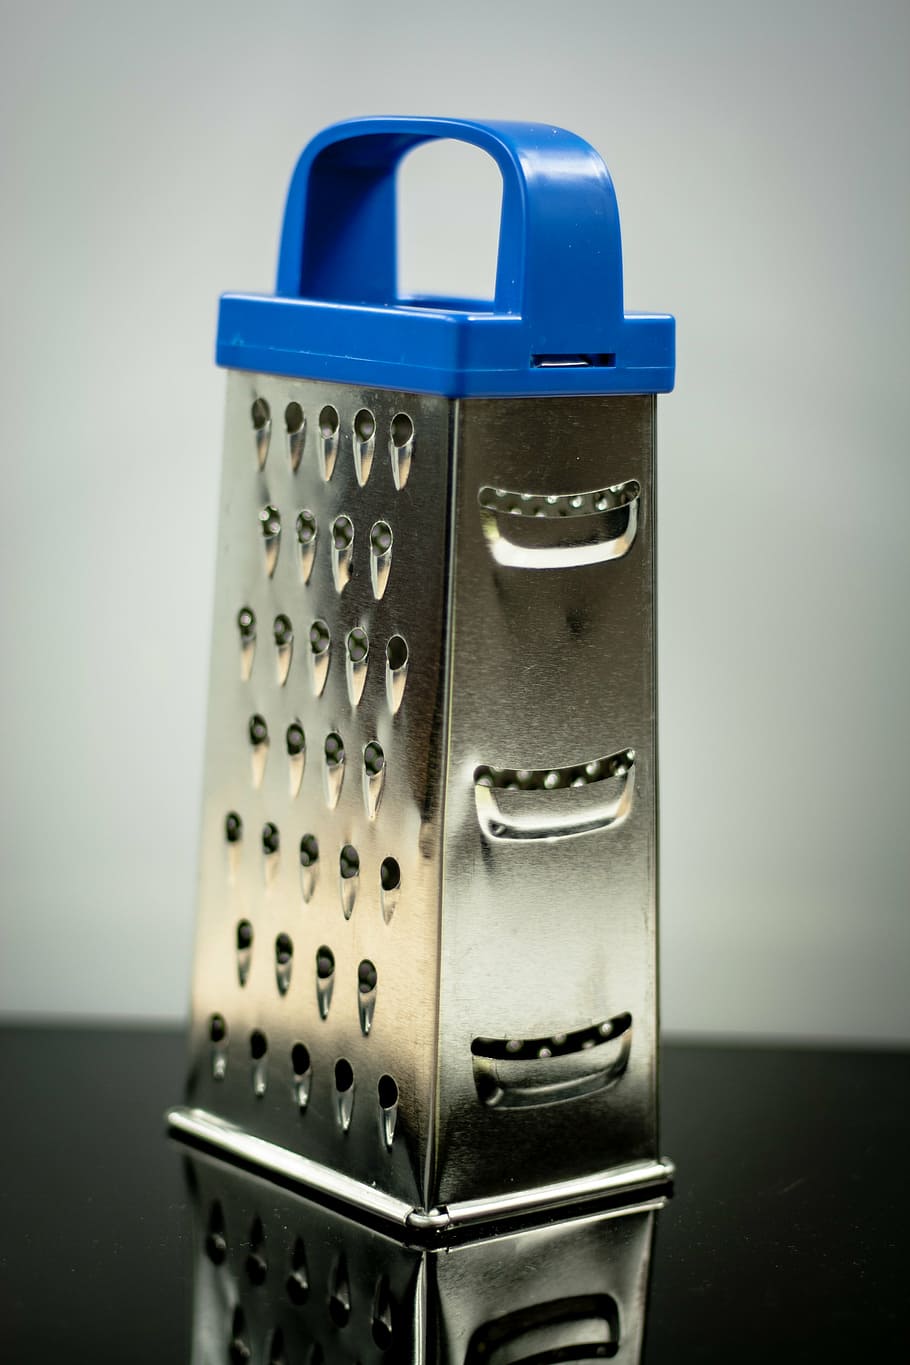 grater, countertop, kitchen, food, cooking, indoors, technology, blue, close-up, single object